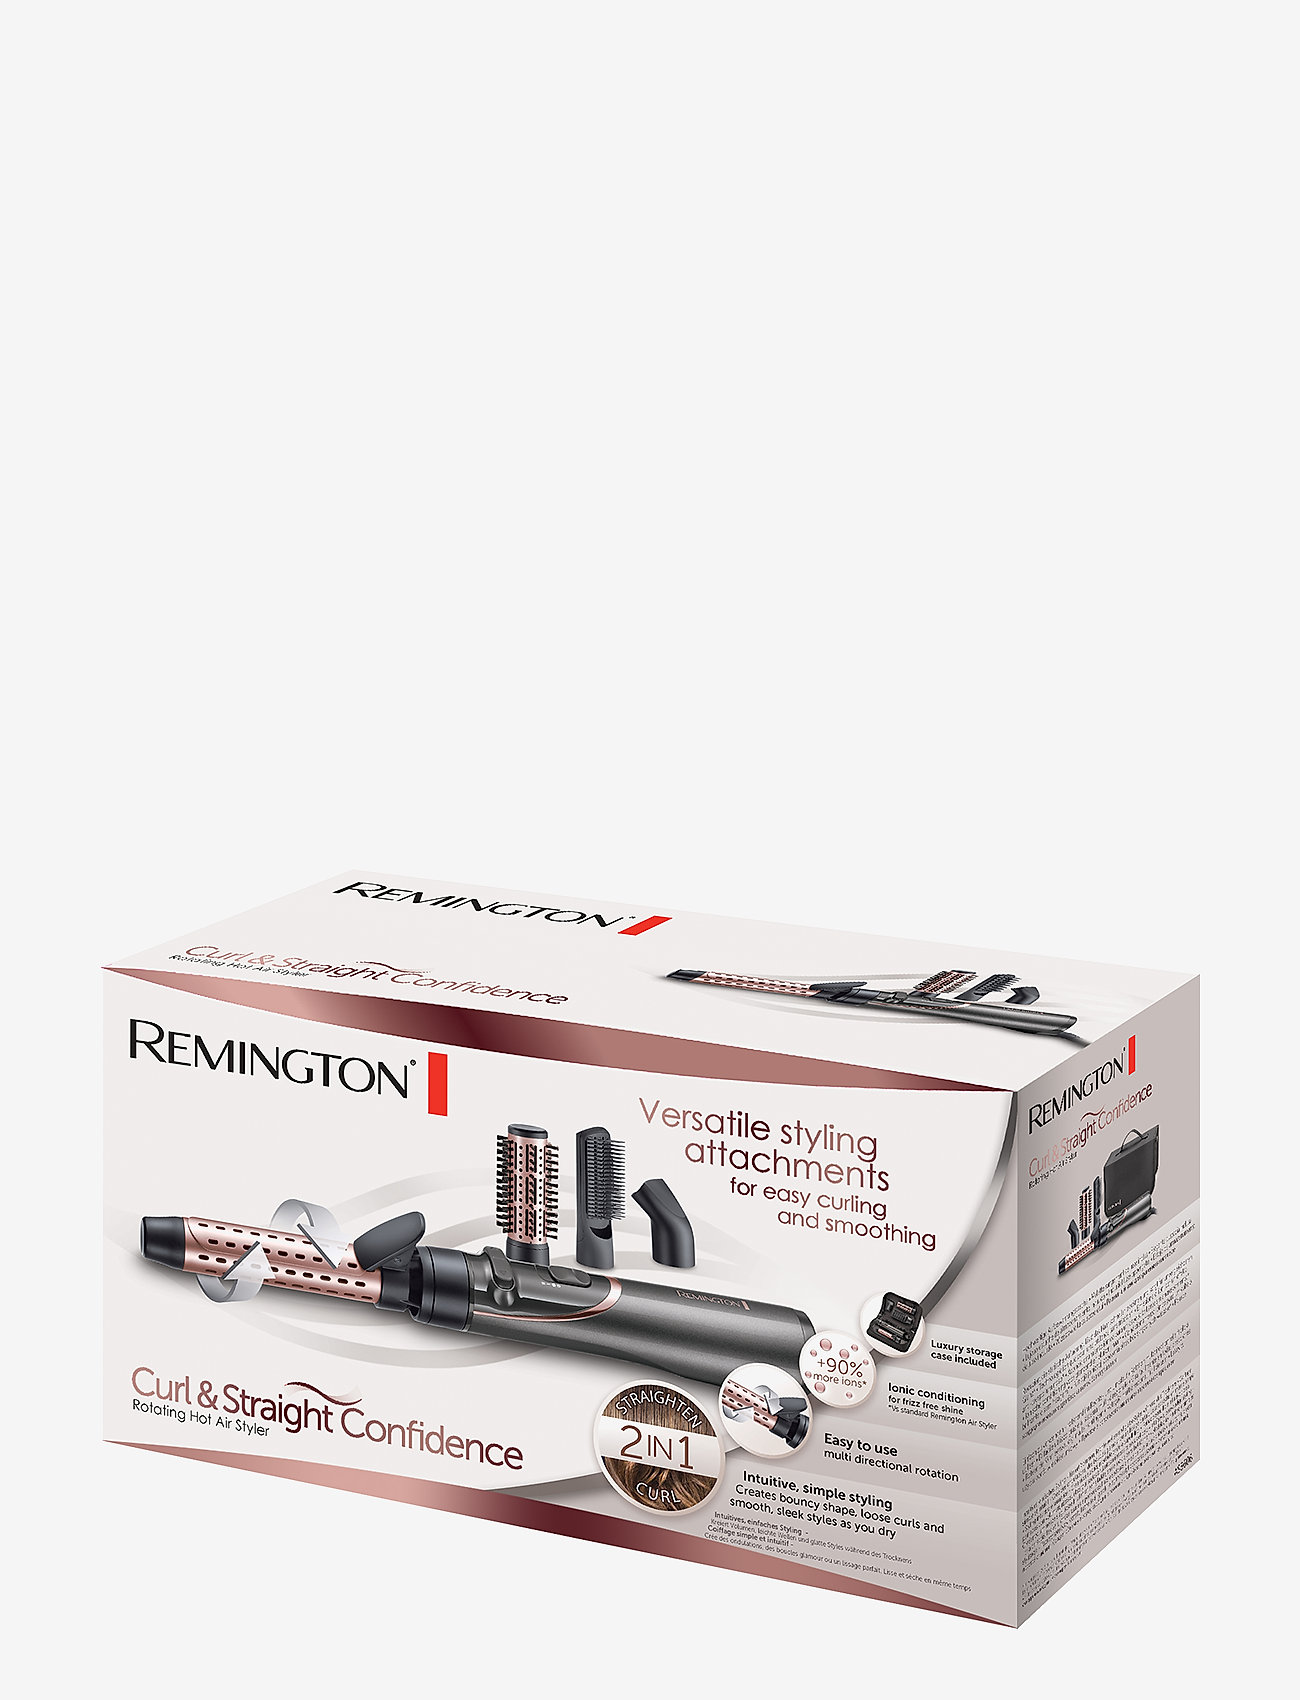 Remington - AS8606 Curl & Straight Confidence Rotating Hot Air Styler - mellem 500-1000 kr - no color - 1